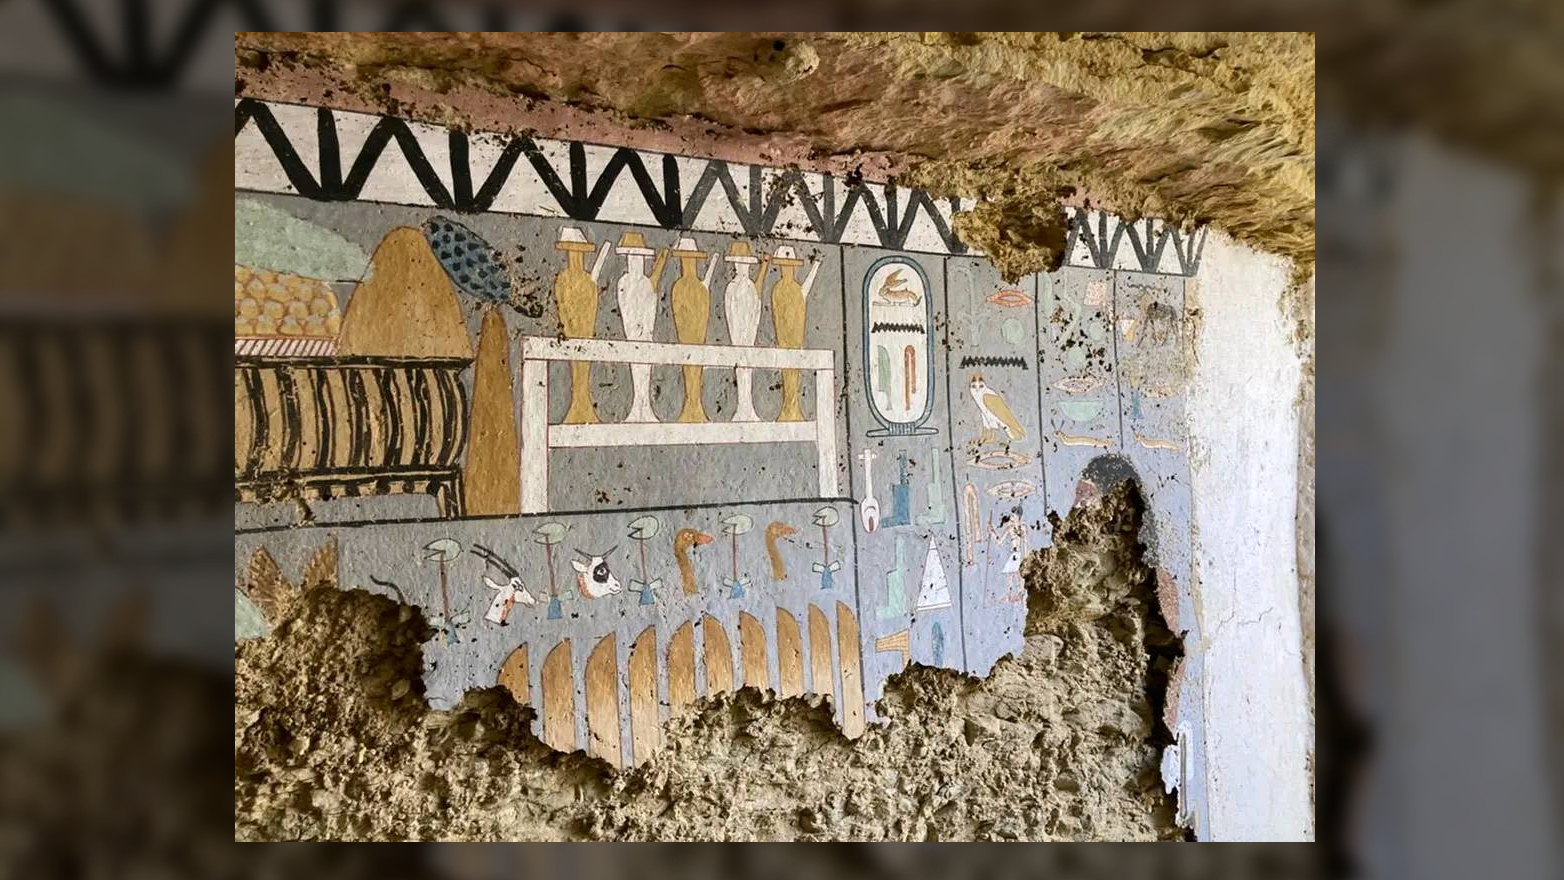 This photo shows a wall painting found inside the tomb of Khnumdjedef, a man who was the 